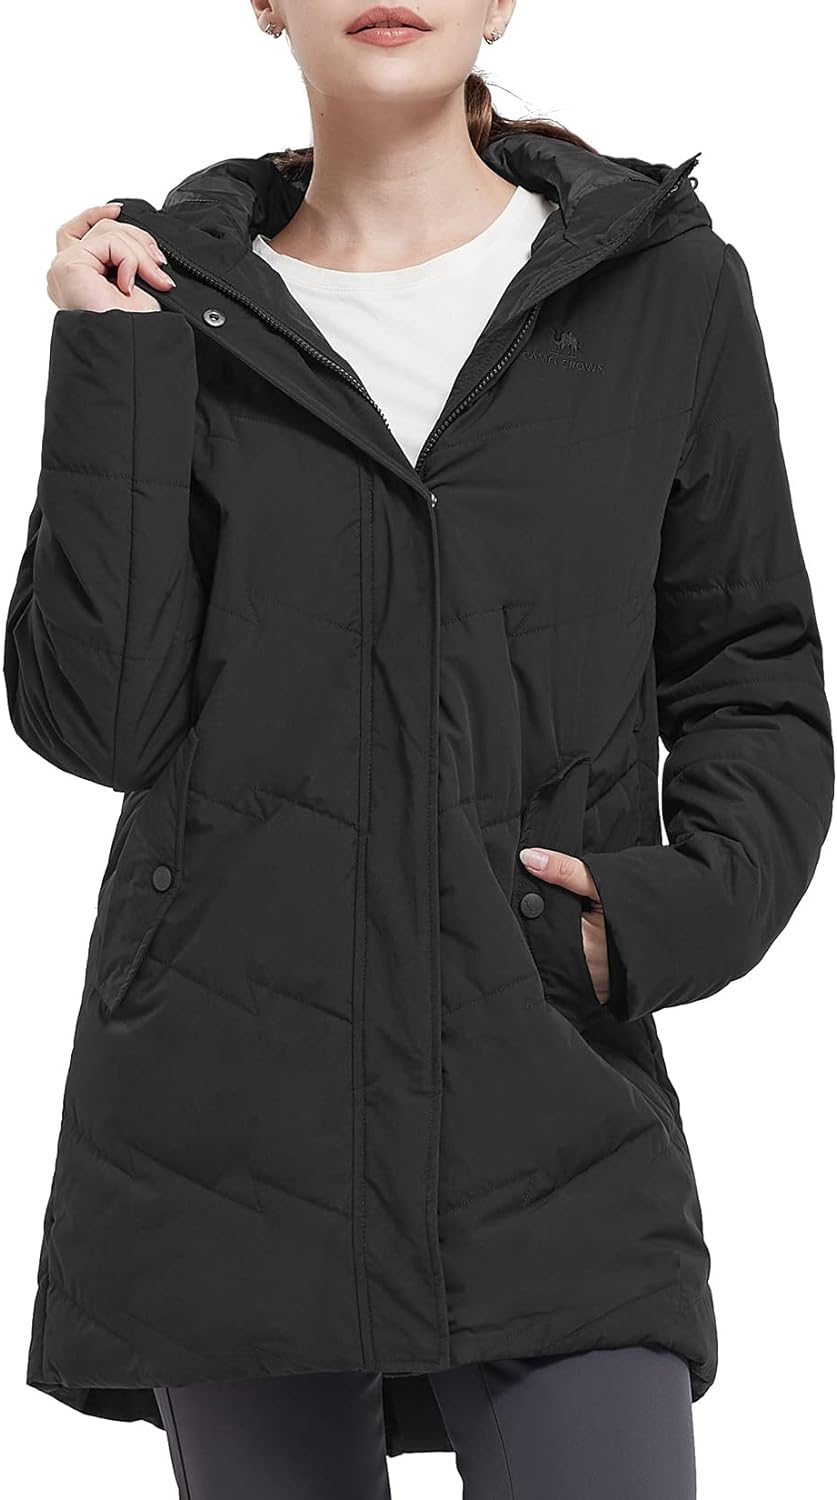 I needed a warm jacket for a few trips to cold places. I live in Florida so I don't have a need for a winter jacket on a regular basis. I chose this jacket because of the very low price. It is perfect! So comfy and warm. The quality is fantastic for such a low price. I am 5'4", 145 lbs and the medium fits perfectly. Very pleased and I highly recommend!